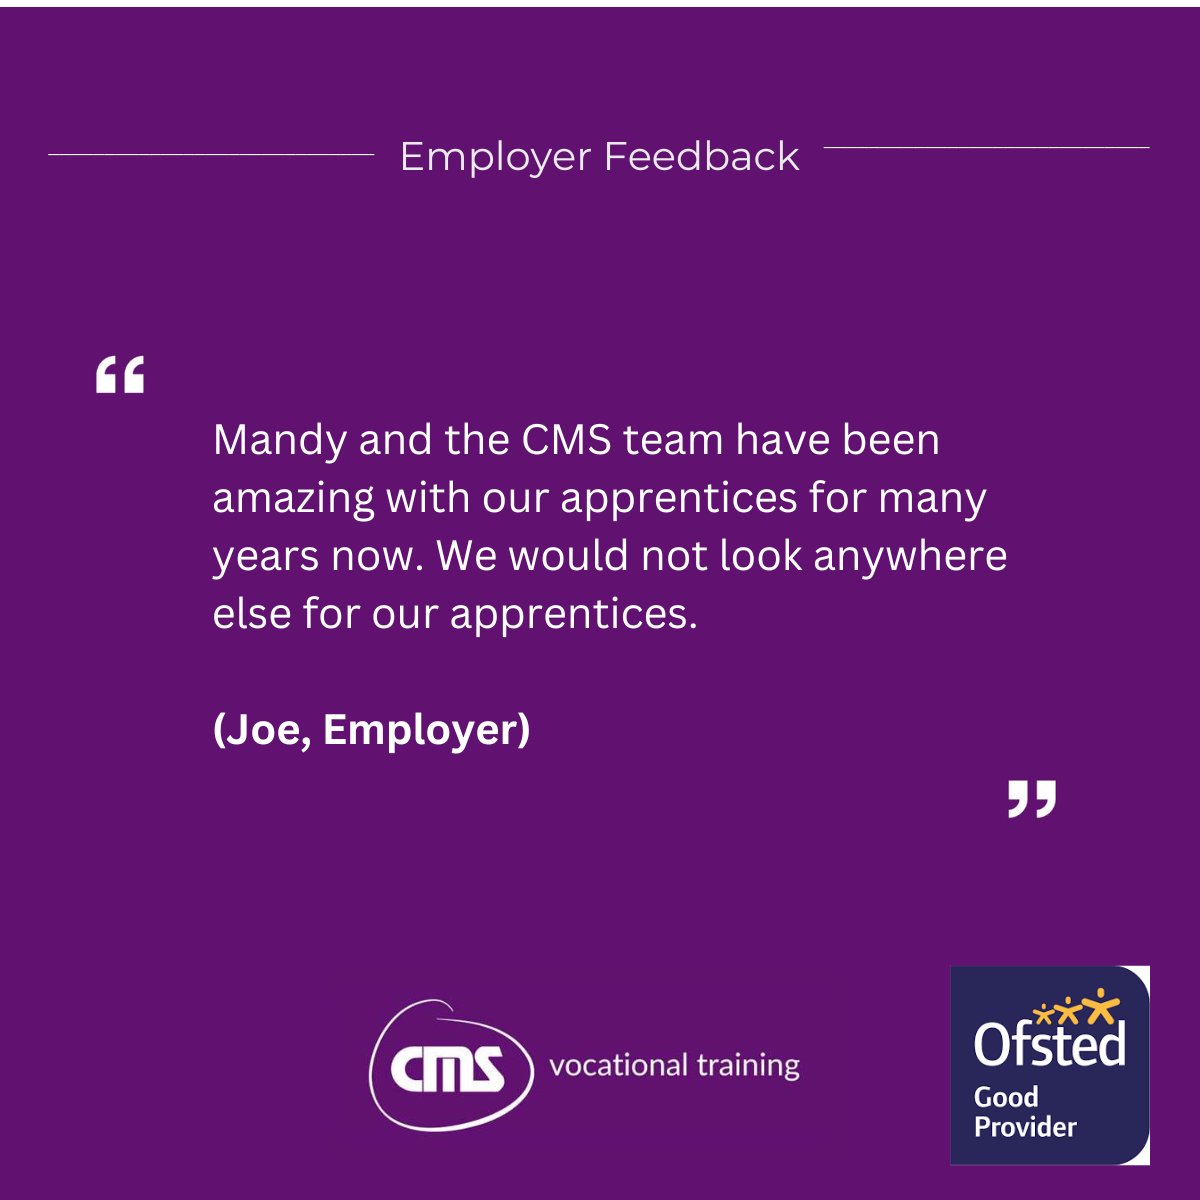 CMS's recent learner feedback shows that learners are highly satisfied with our #apprenticeships, staff support, and knowledge extension. Prepare for your #career steps with our high-quality learning experience.  #LearnerFeedback #CareerPreparation #QualityLearningExperience